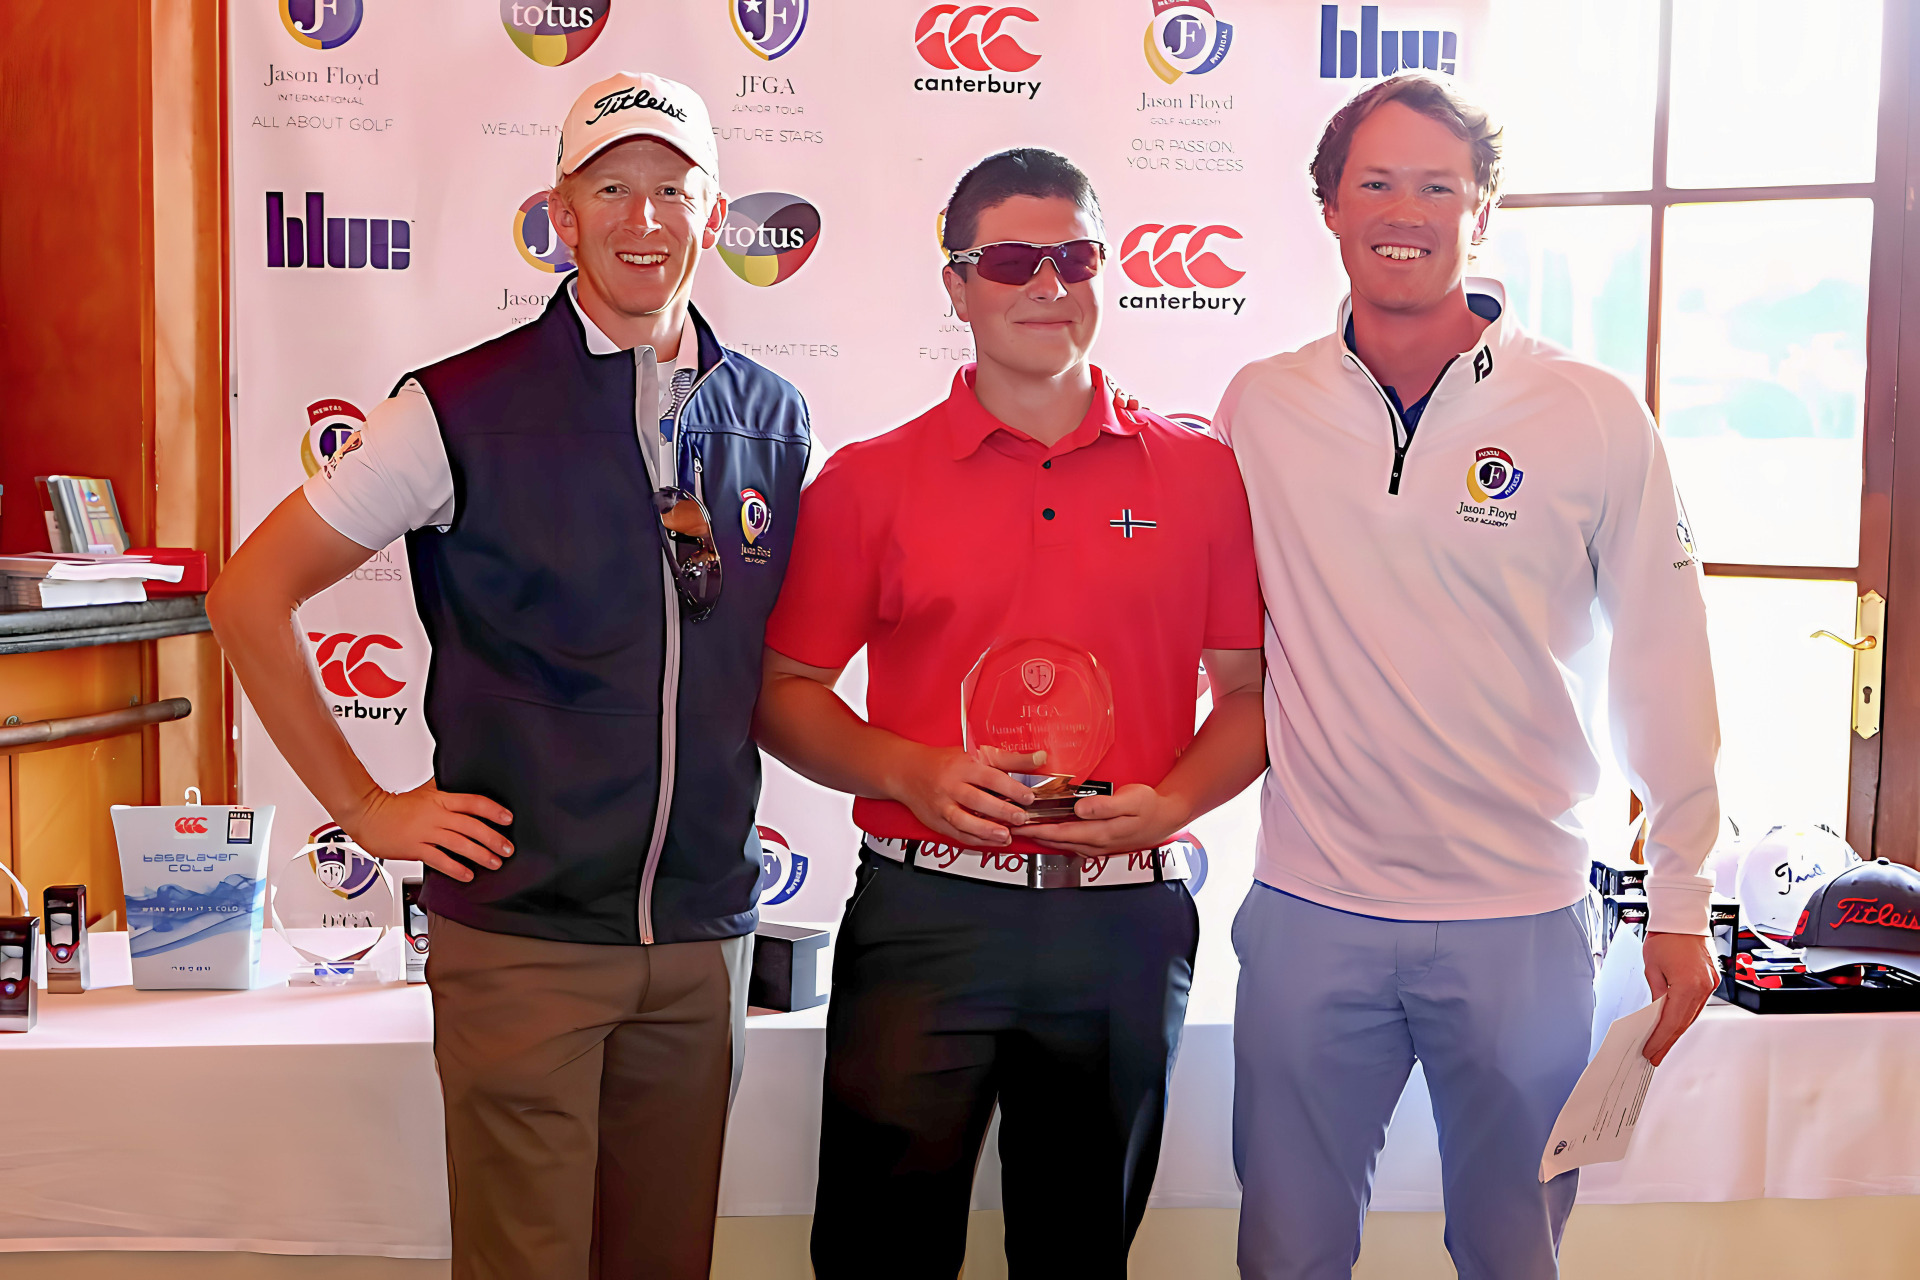 Viktor Hovland (centre) pictured at the 2014 Triple A World Junior Golf Series where he won the boys category. Also pictured (left) is Jason Floyd - Jason Floyd Golf Academy and Triple A World Junior Golf Series Founder.